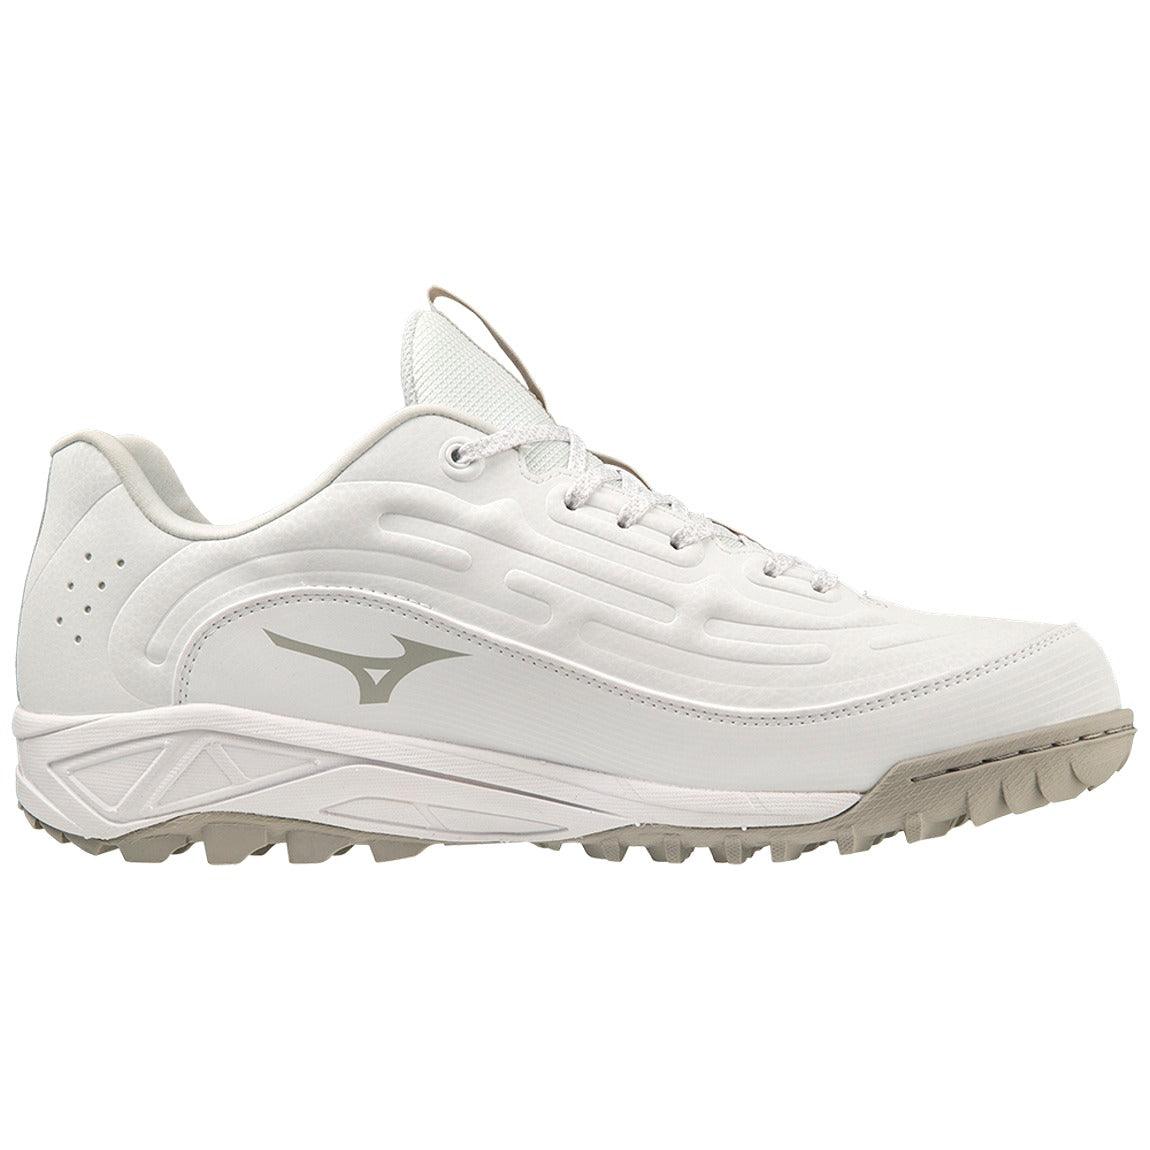 Mizuno Ambition 3 BB Low All Surface Shoe